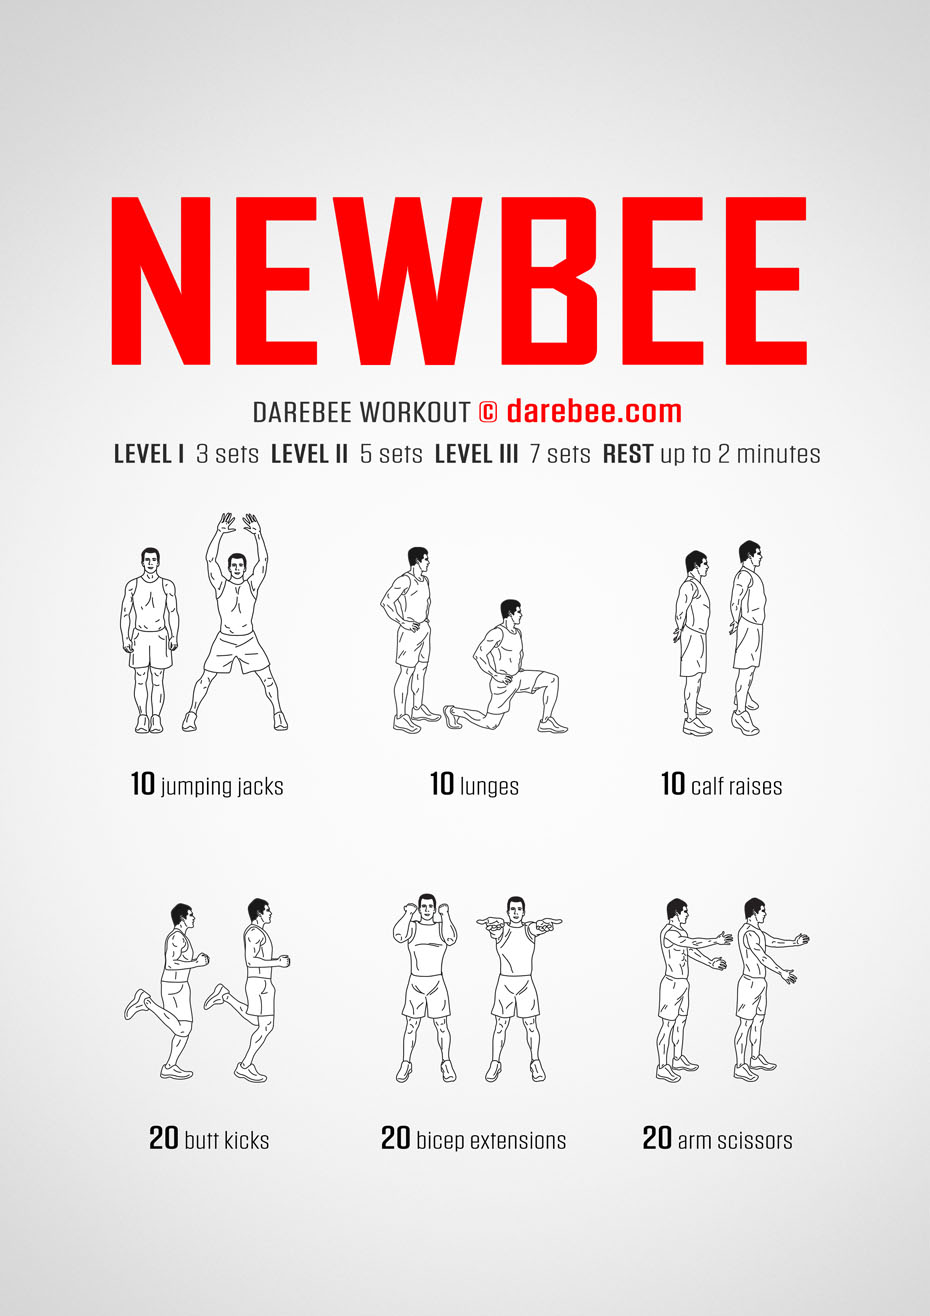 Newbee is a Darebee home-fitness workout that eases you into moving your body, helping you develop all the physical attributes you will need without emptying your power bank. 